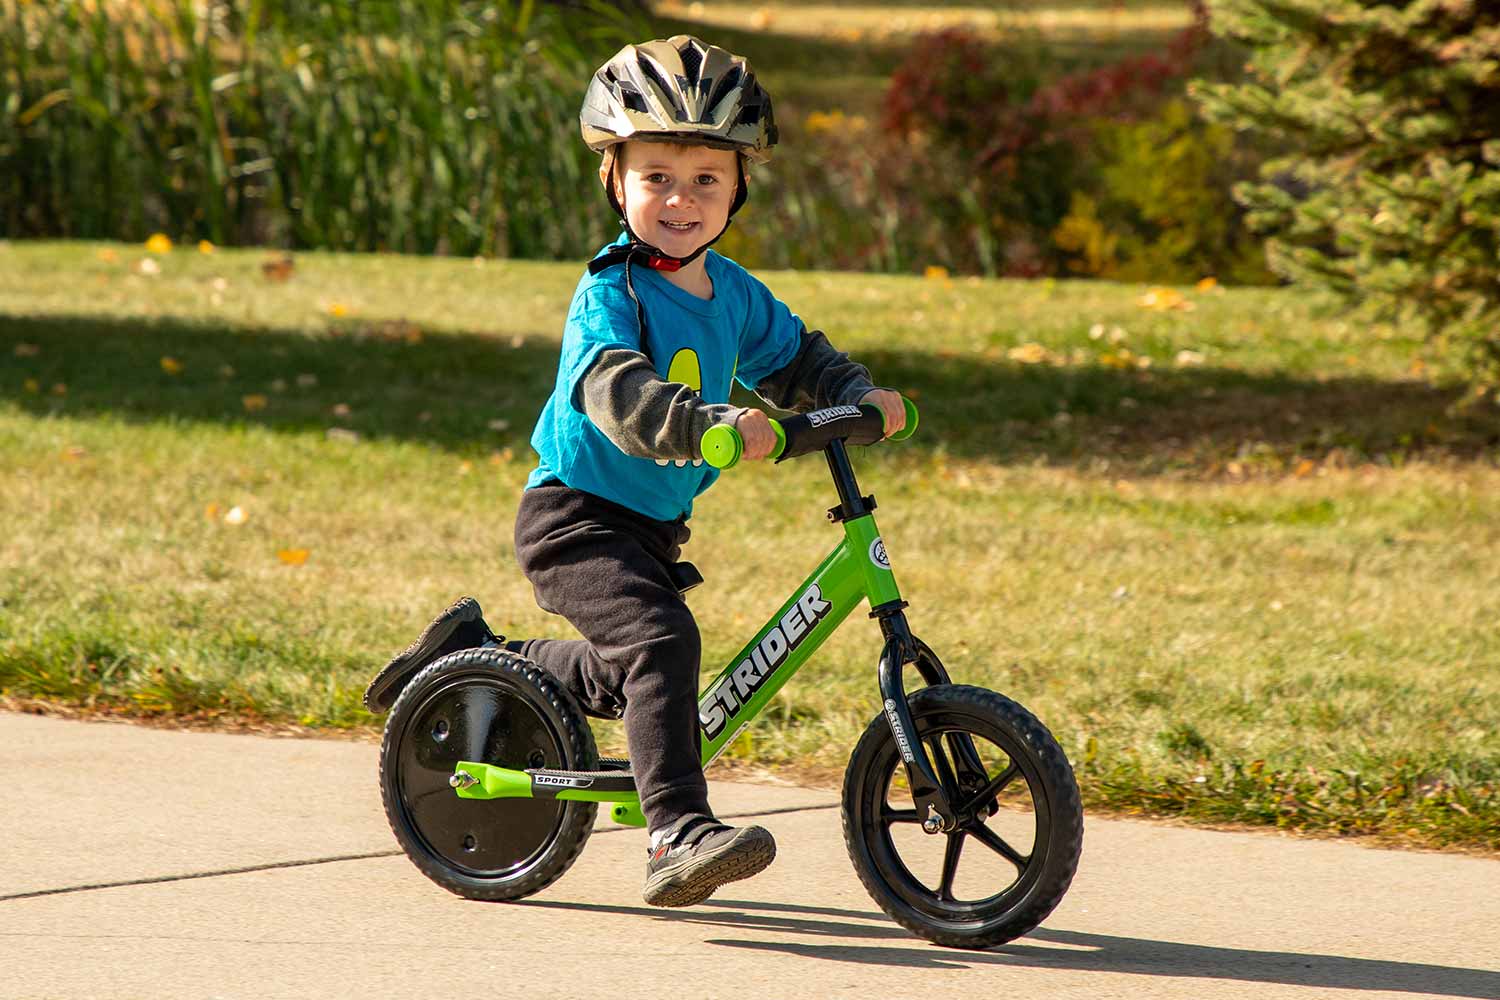 A boy riding a green Strider bike with a set of Disc Wheel Covers on the rear wheel